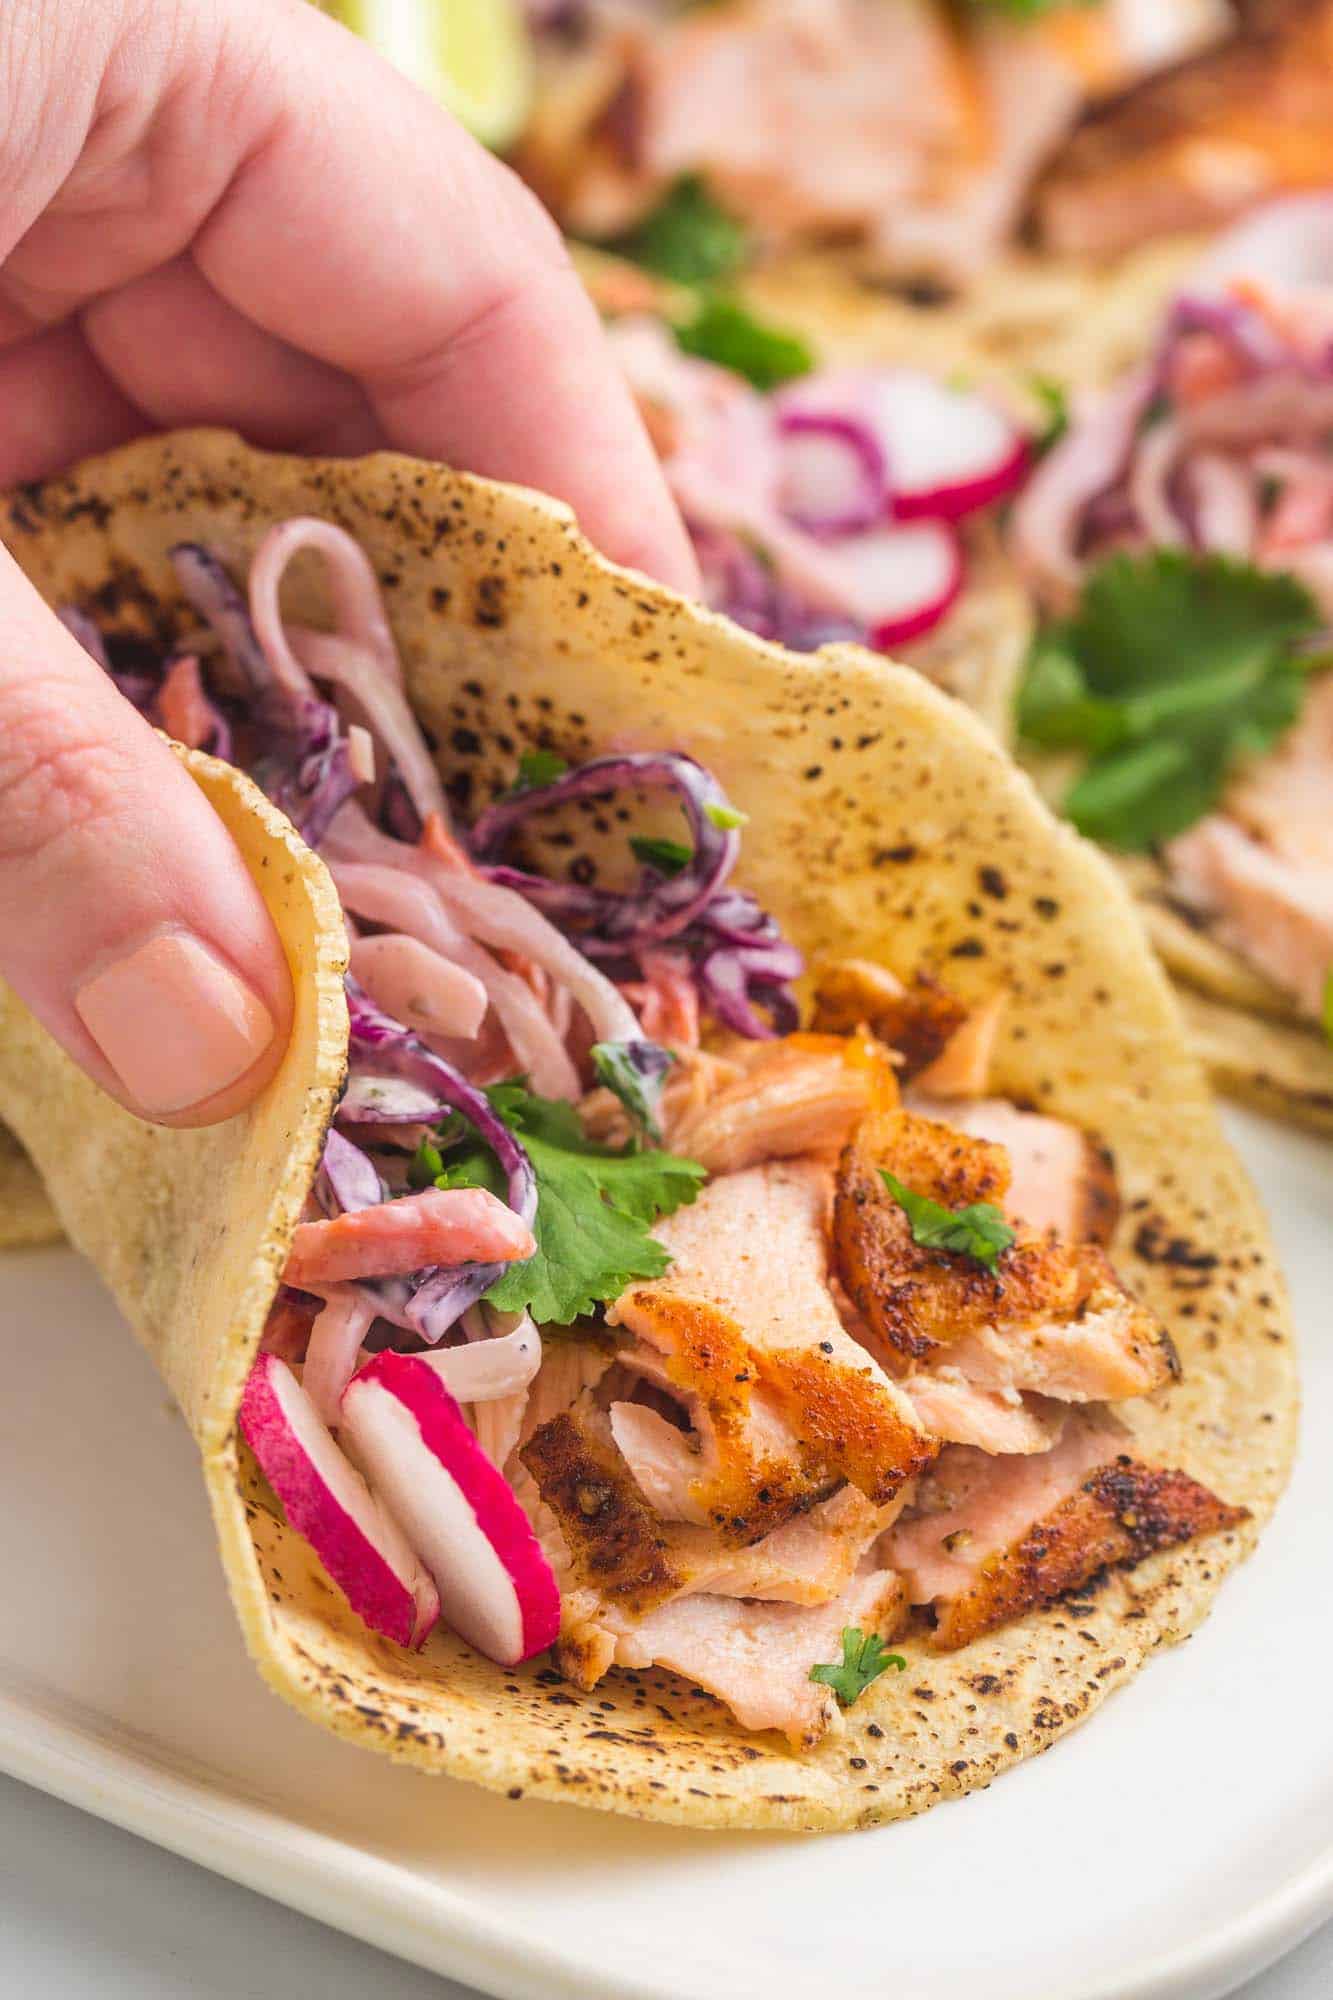 a salmon taco topped with radishes and slaw, wrapped in a corn tortilla, being held.